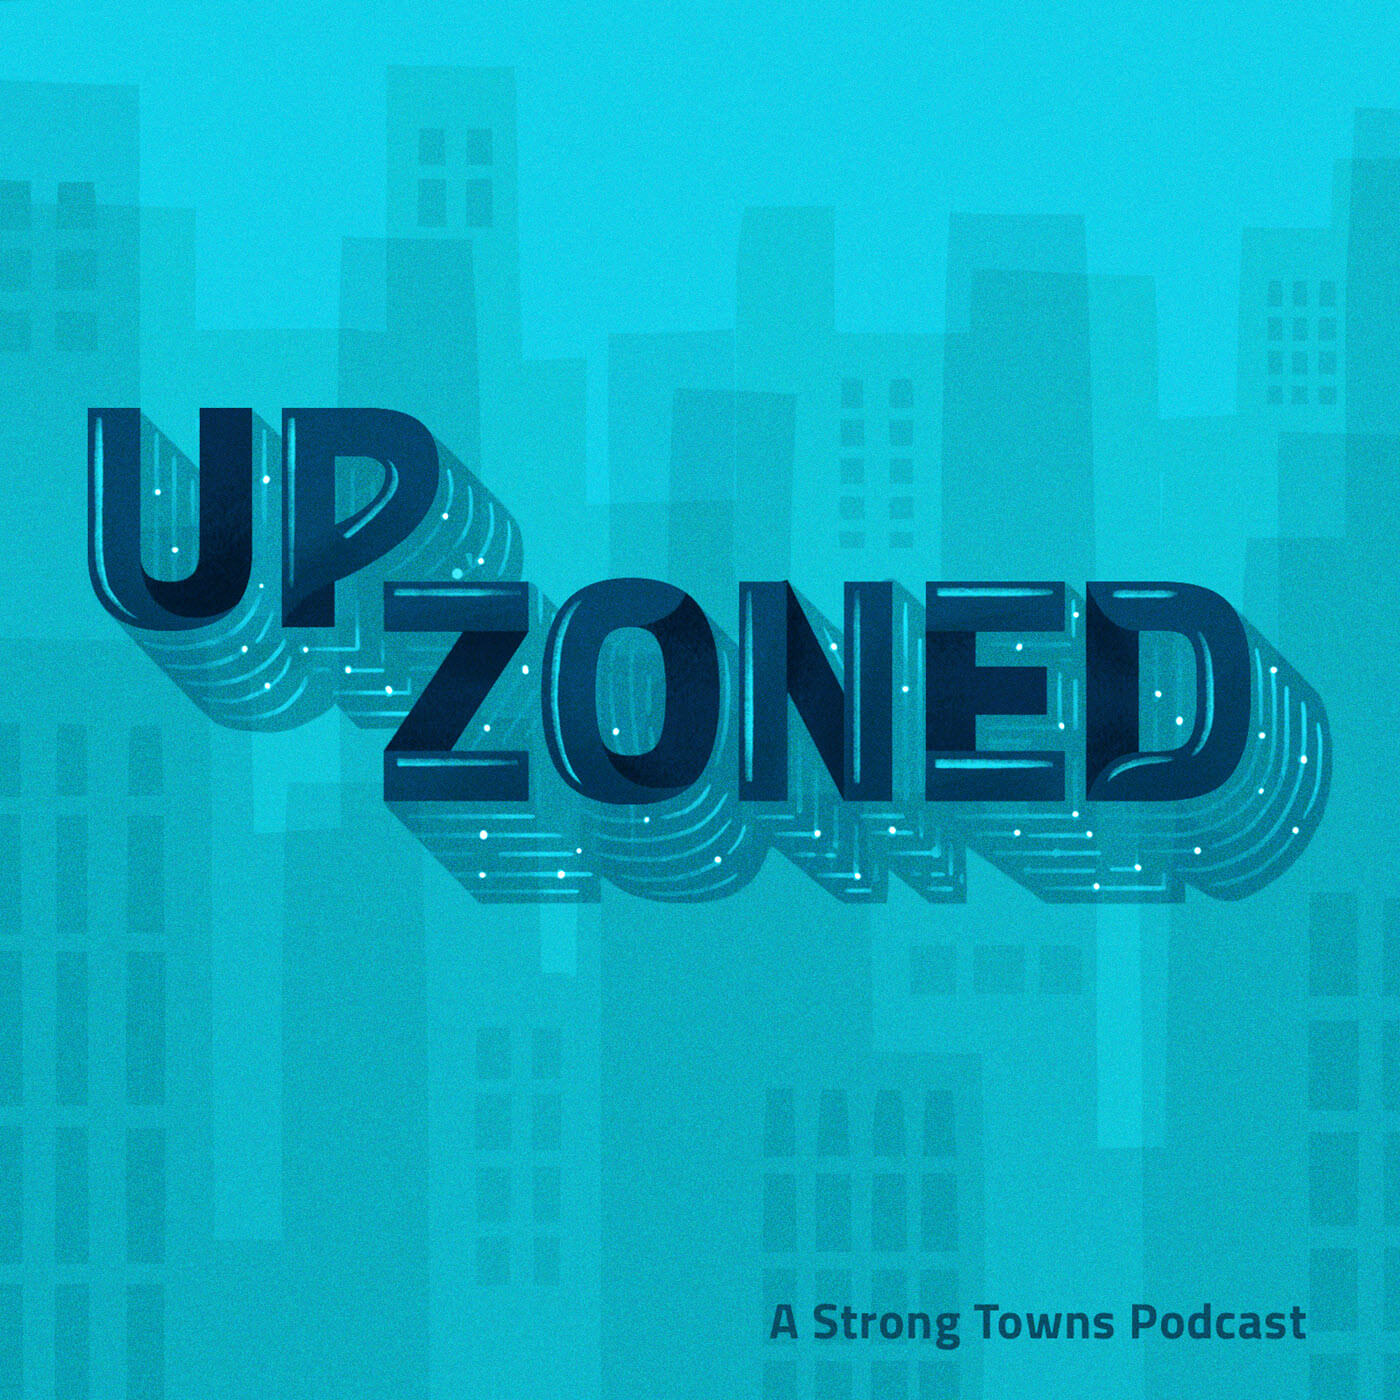 Upzoned: The Podcast to Help You Improve Your Town